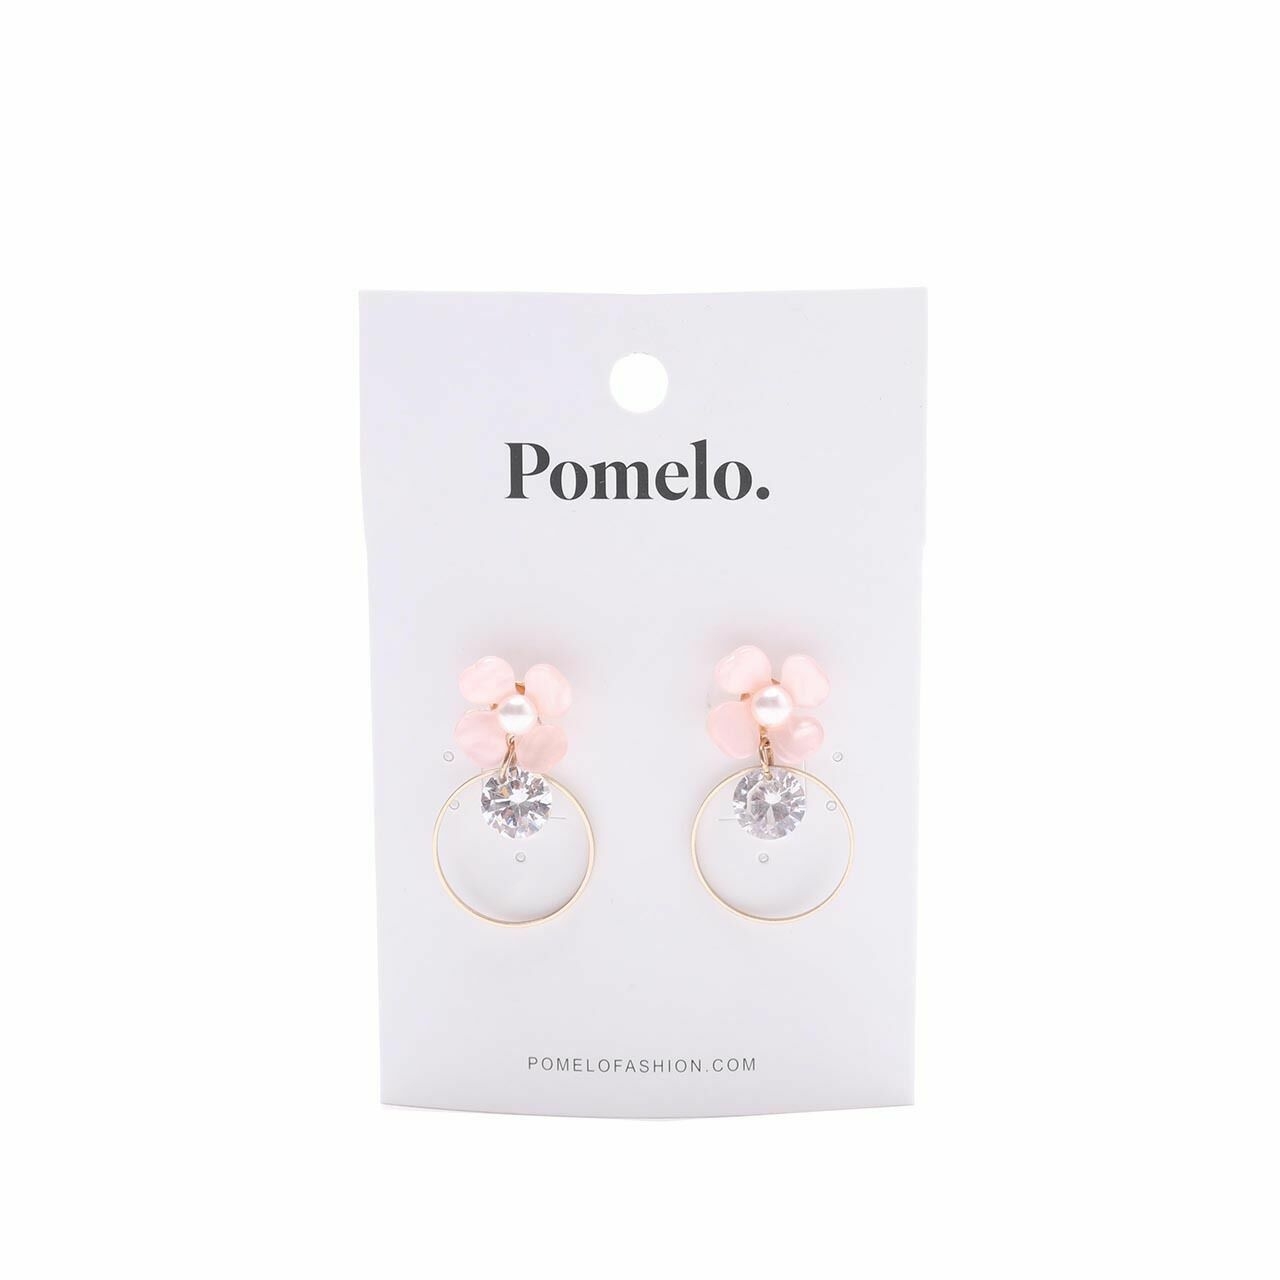 Pomelo. Gold Floral Earring Jewelry